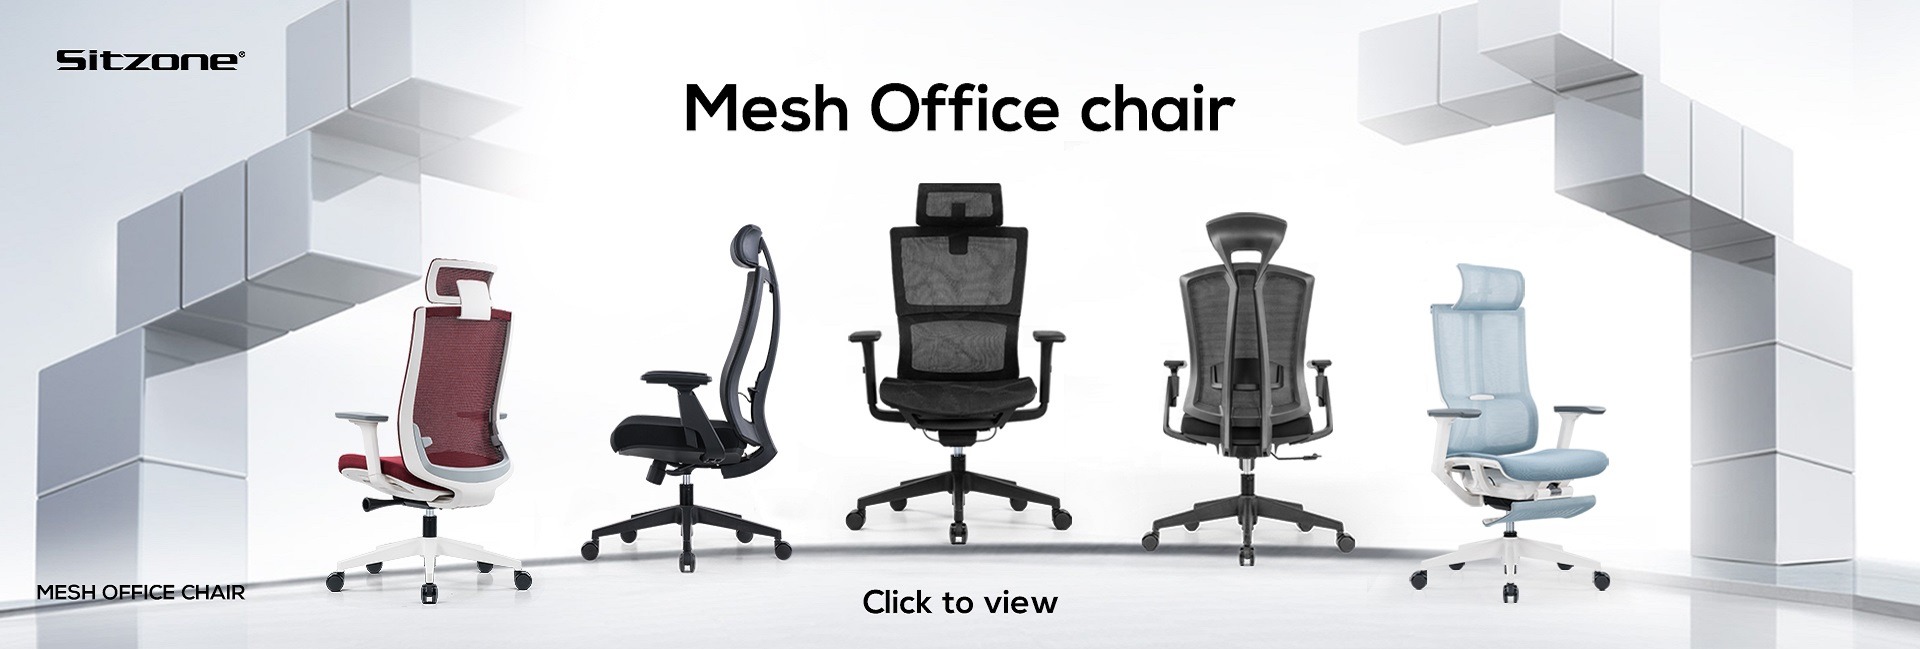 Mesh Office Chair Series of Sitzone 